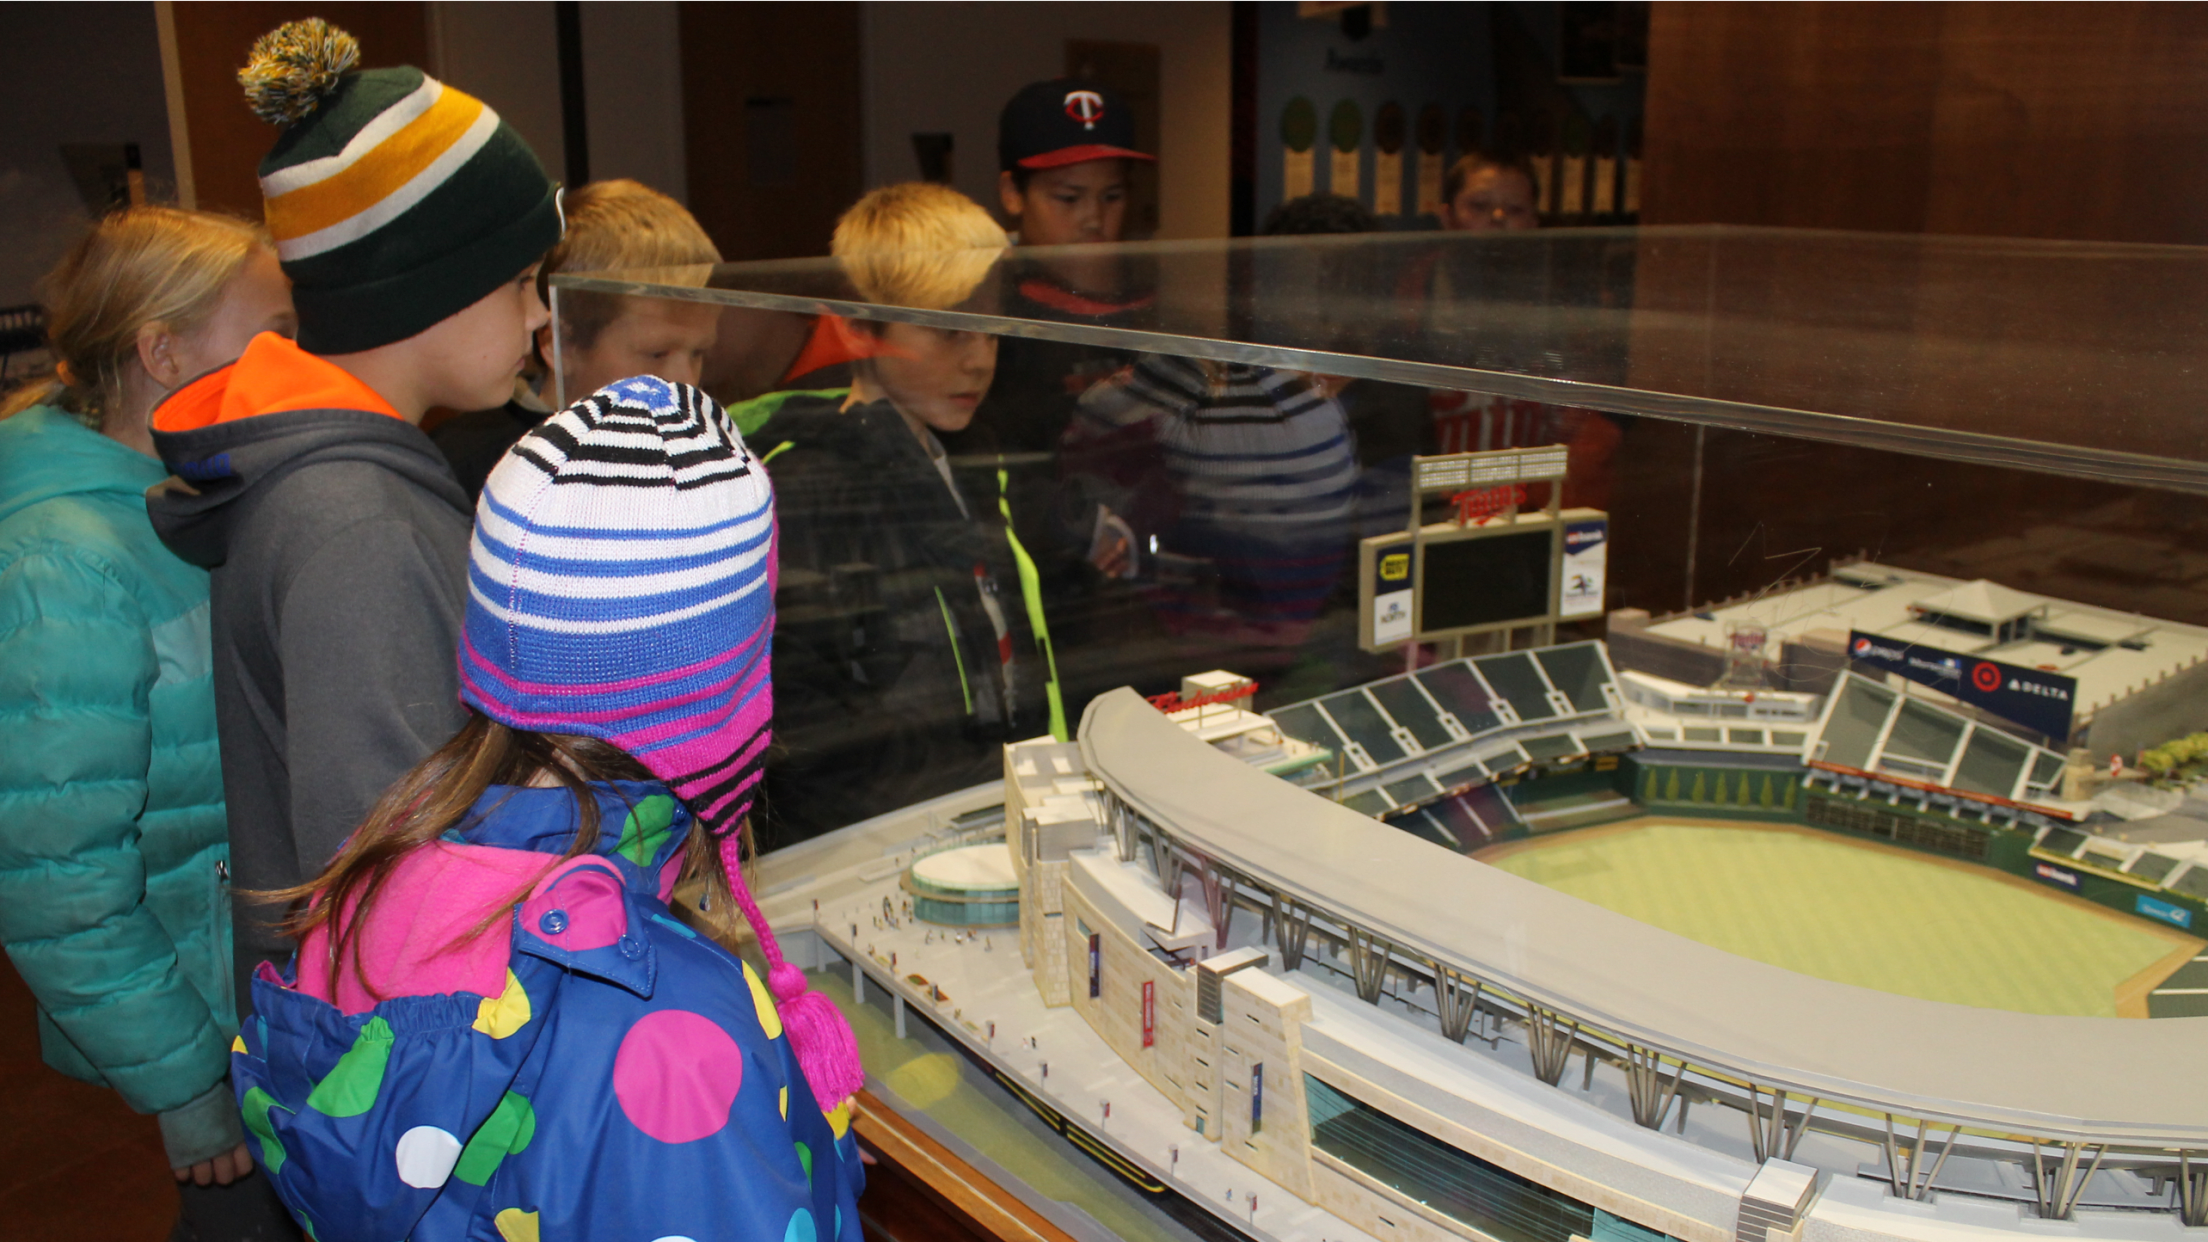 Tours of Target Field